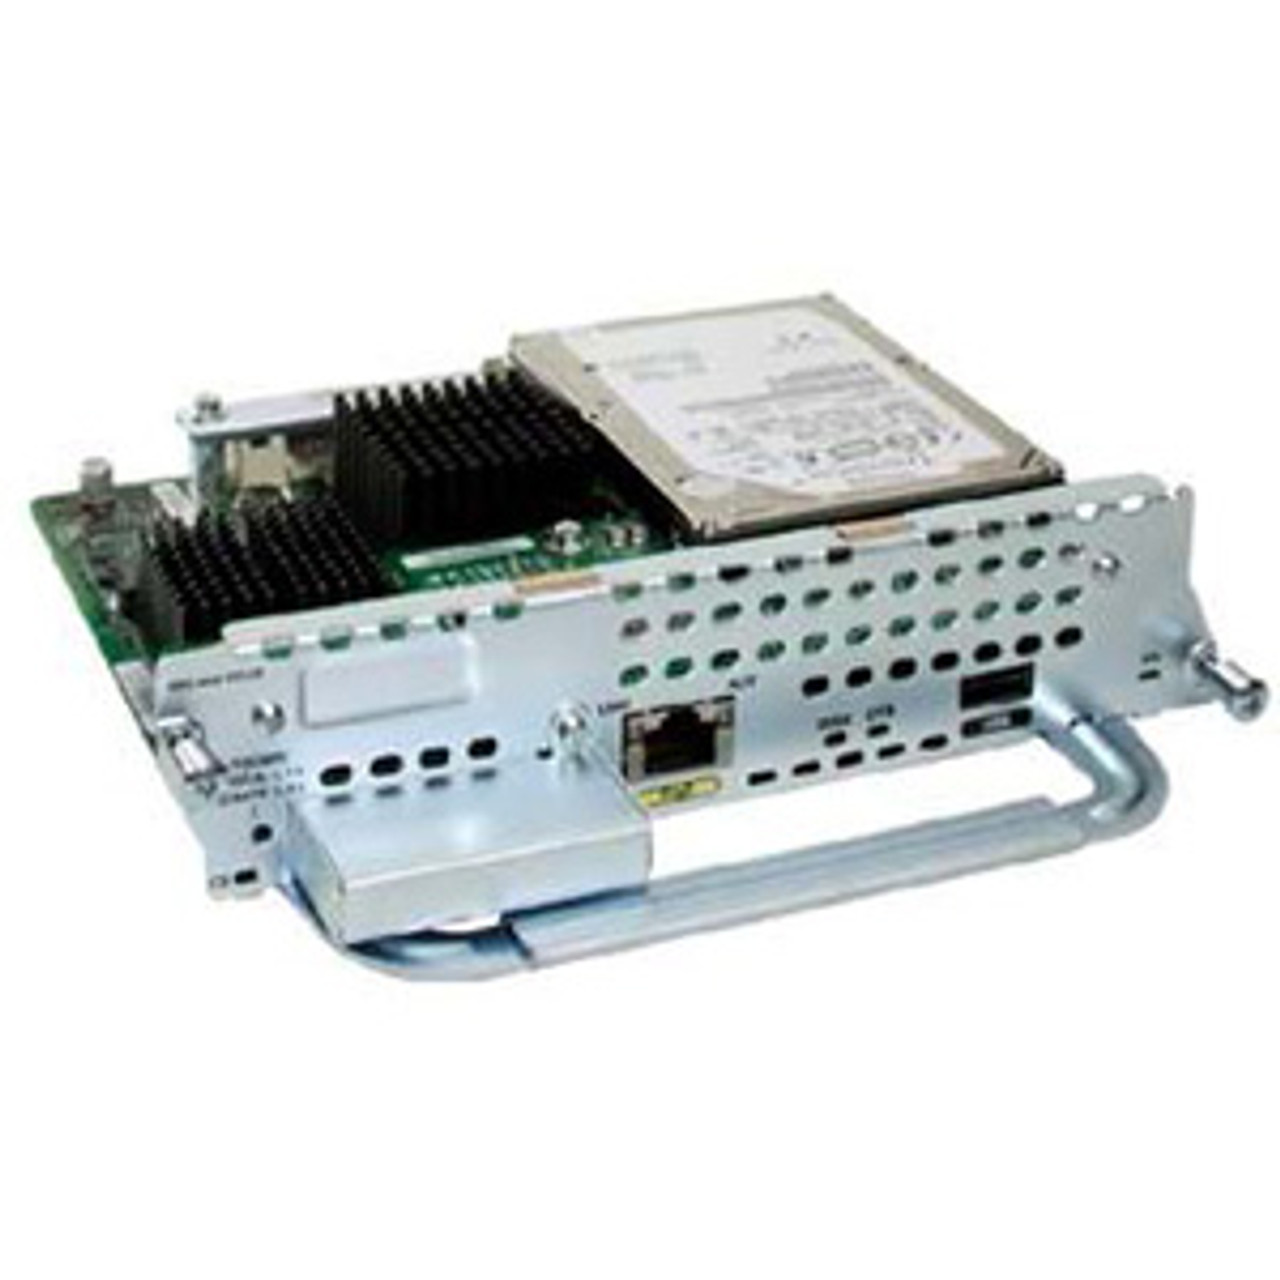 NME-CUSP-522 Cisco Unified SIP Proxy network module (Refurbished)